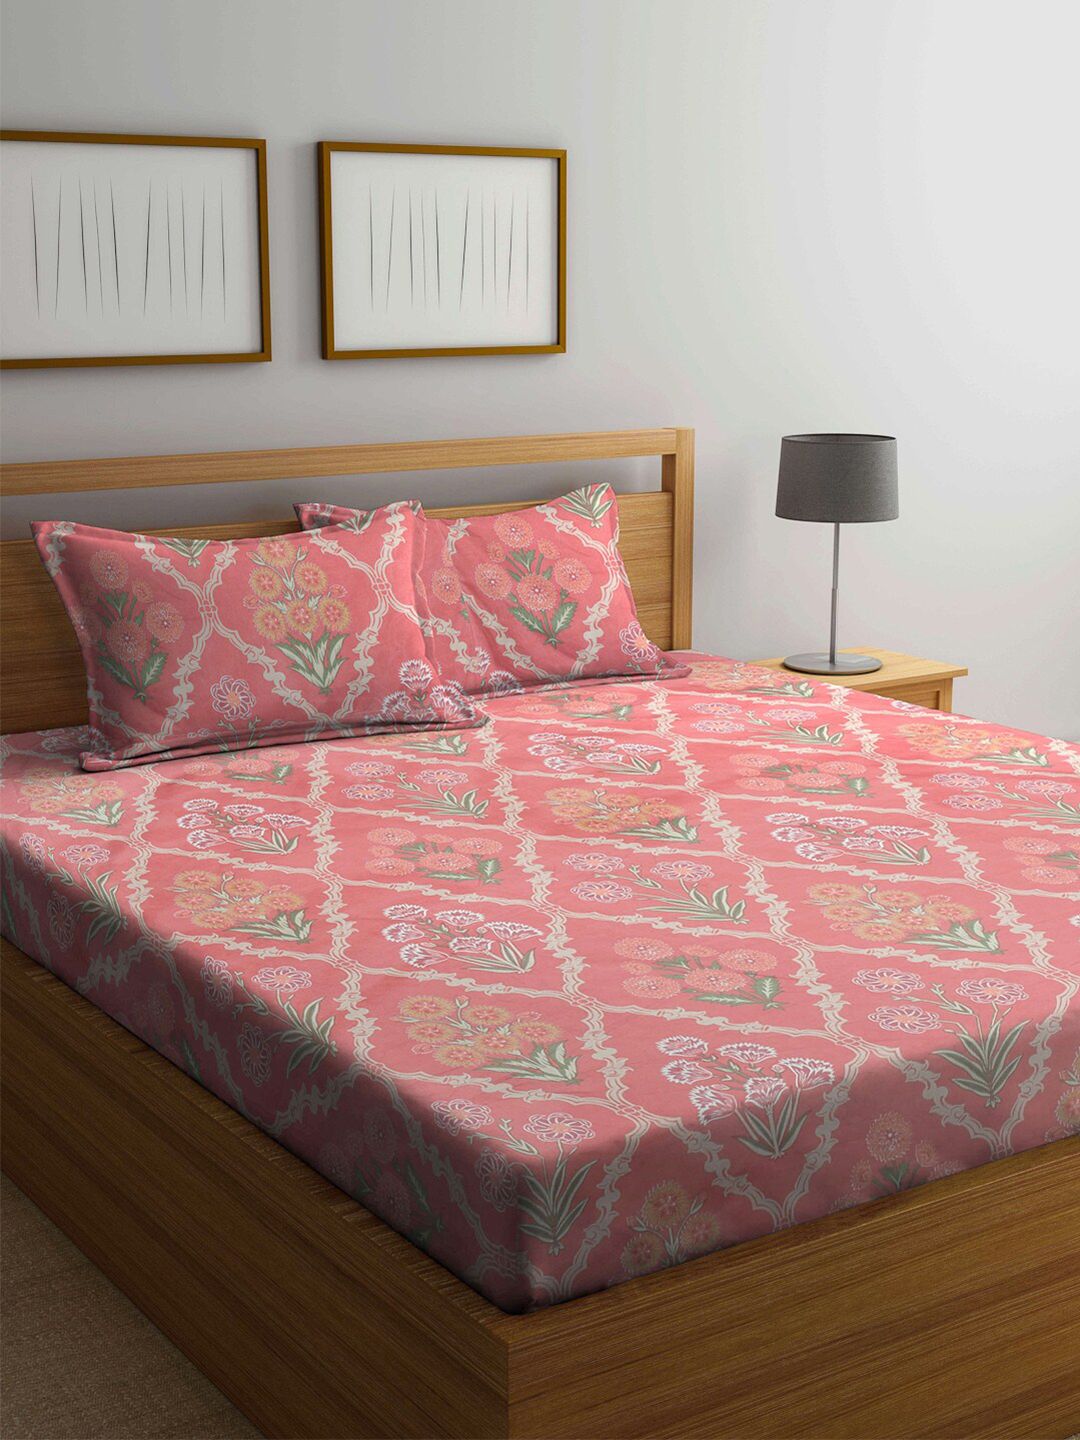 Arrabi Peach-Coloured & White Floral 300 TC King Bedsheet with 2 Pillow Covers Price in India